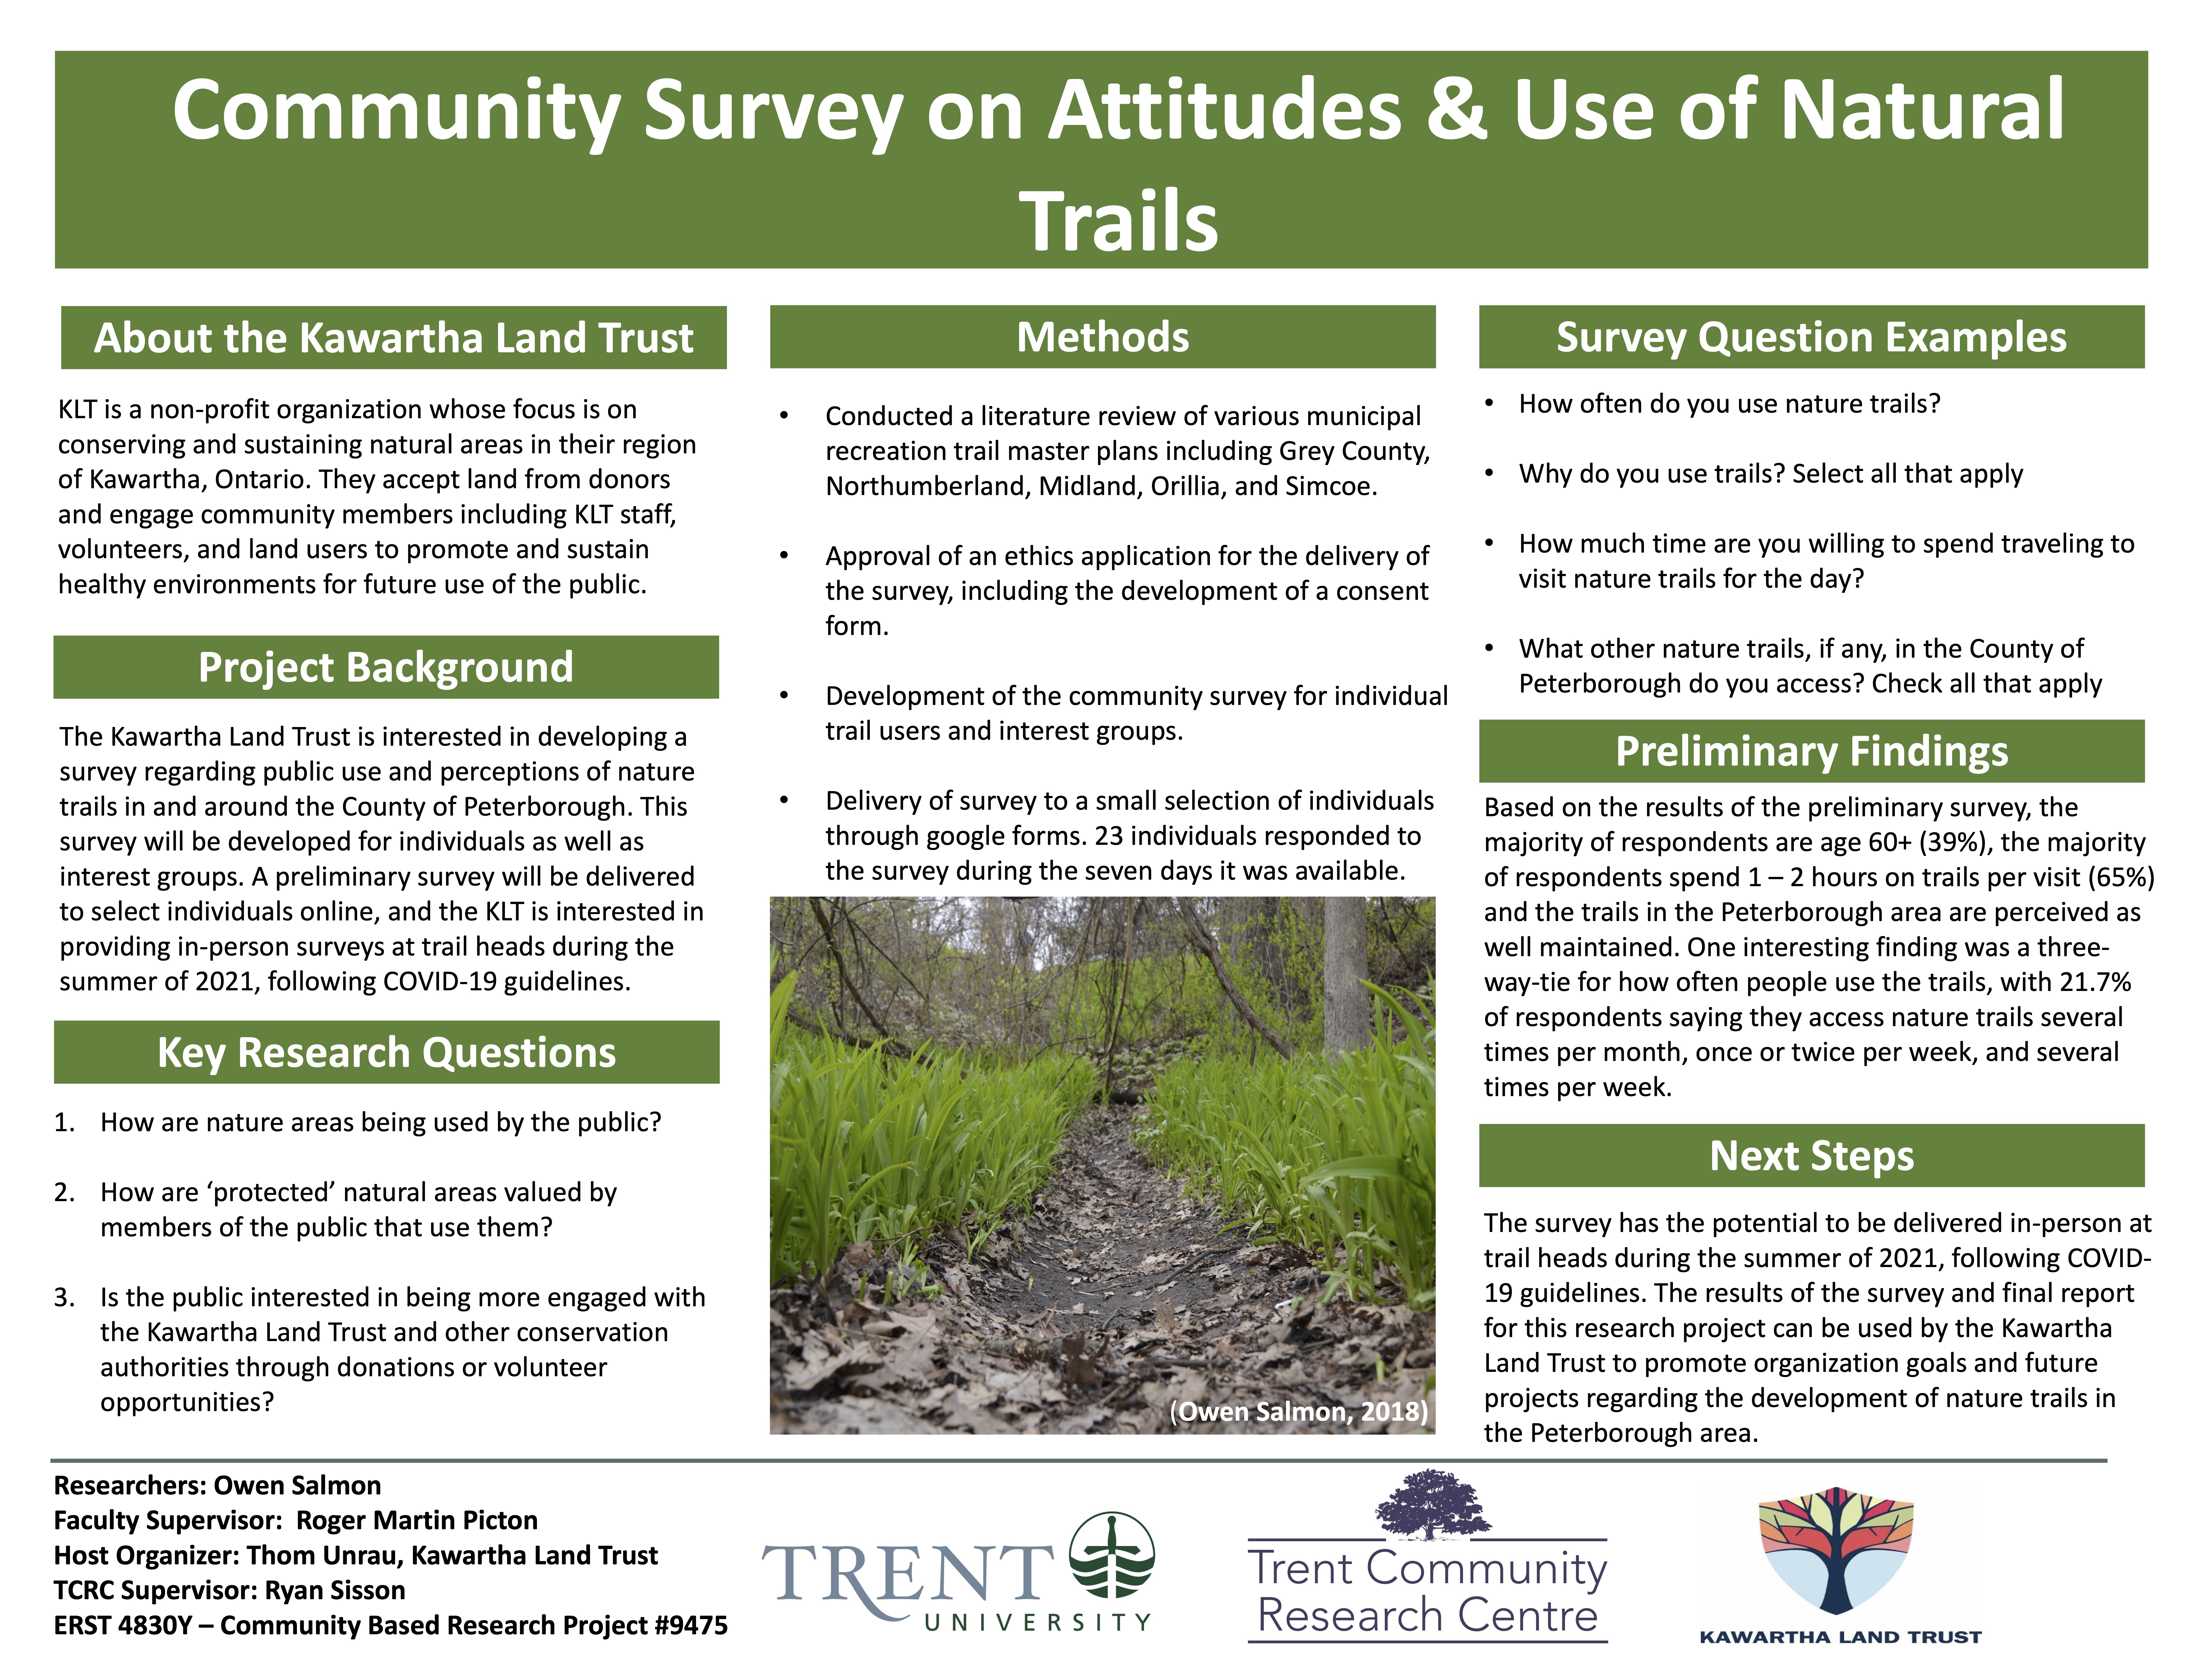 Research Poster for Community Survey on Attitudes and Use of Nature Trails